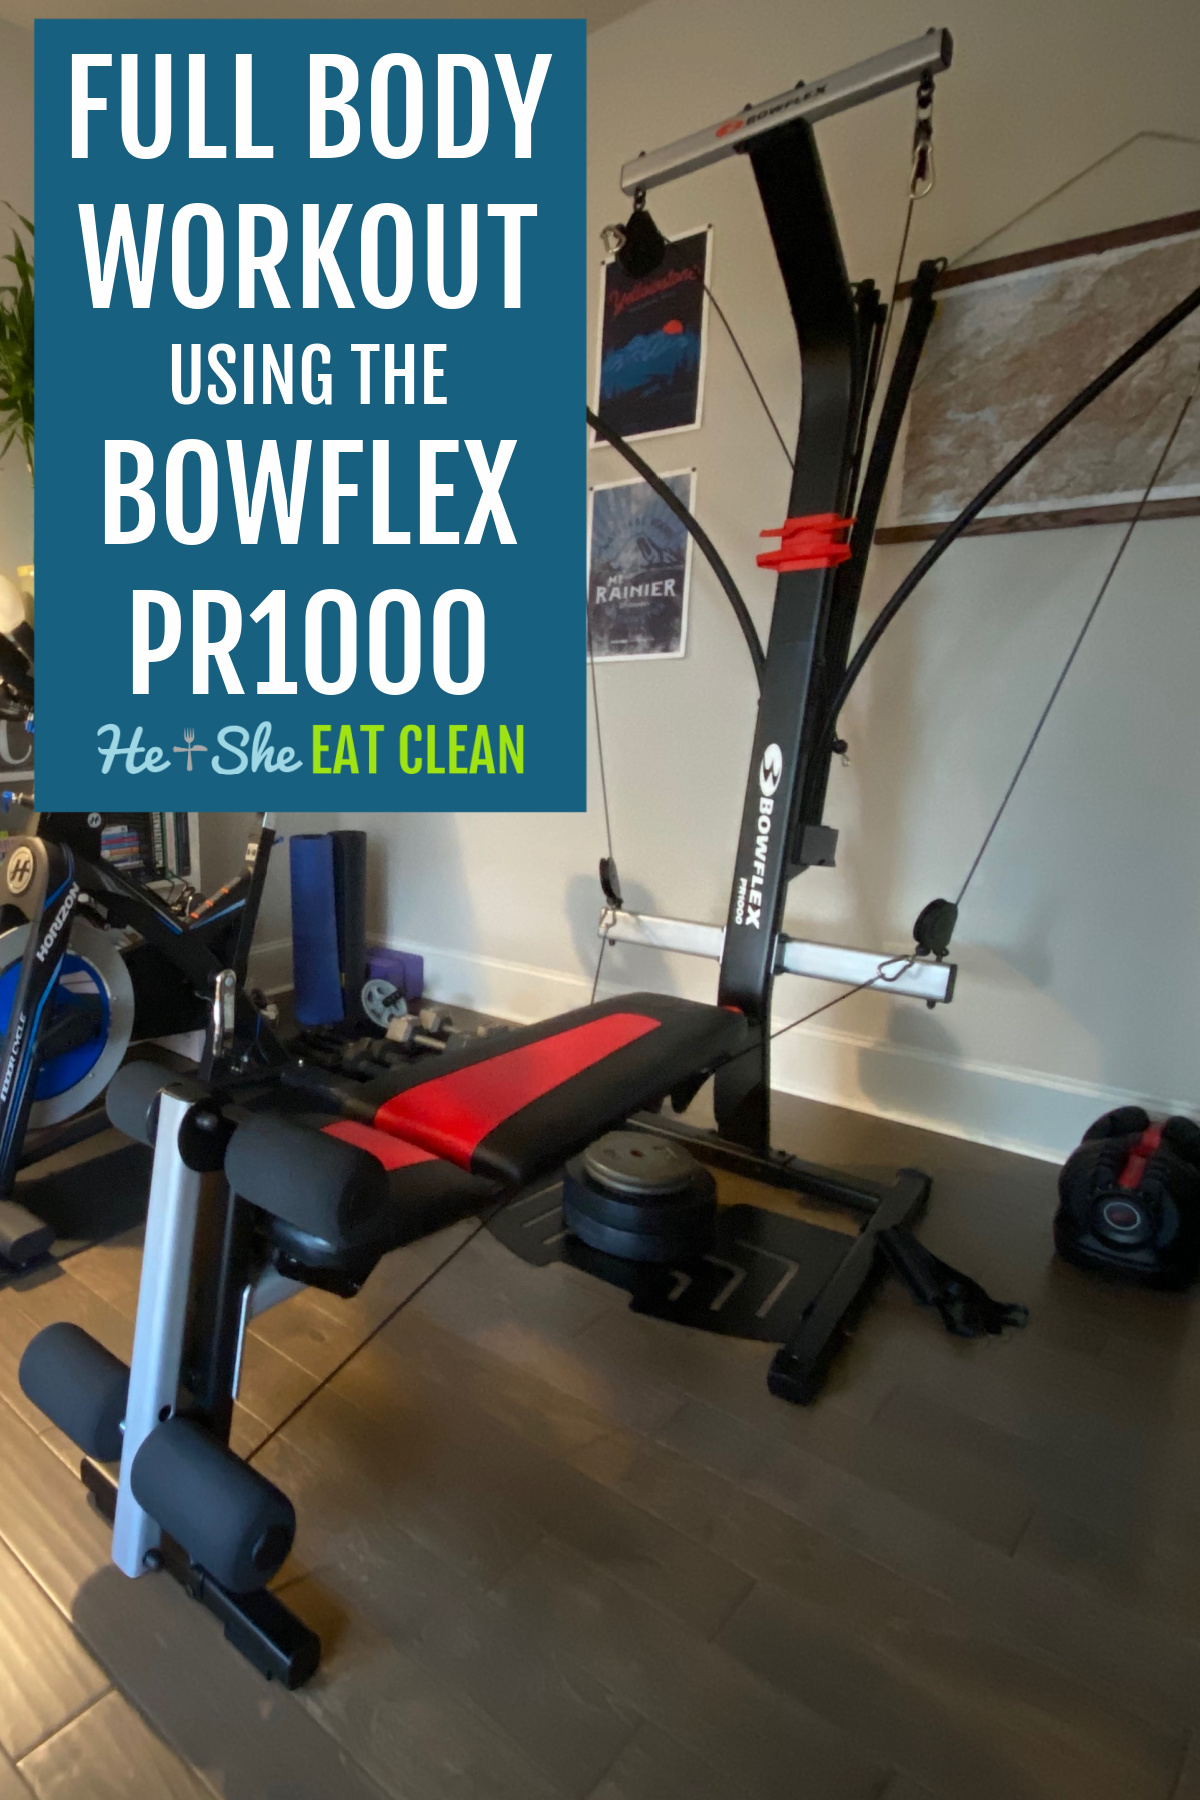 Full Body Workout Using the Bowflex PR1000 (includes video)